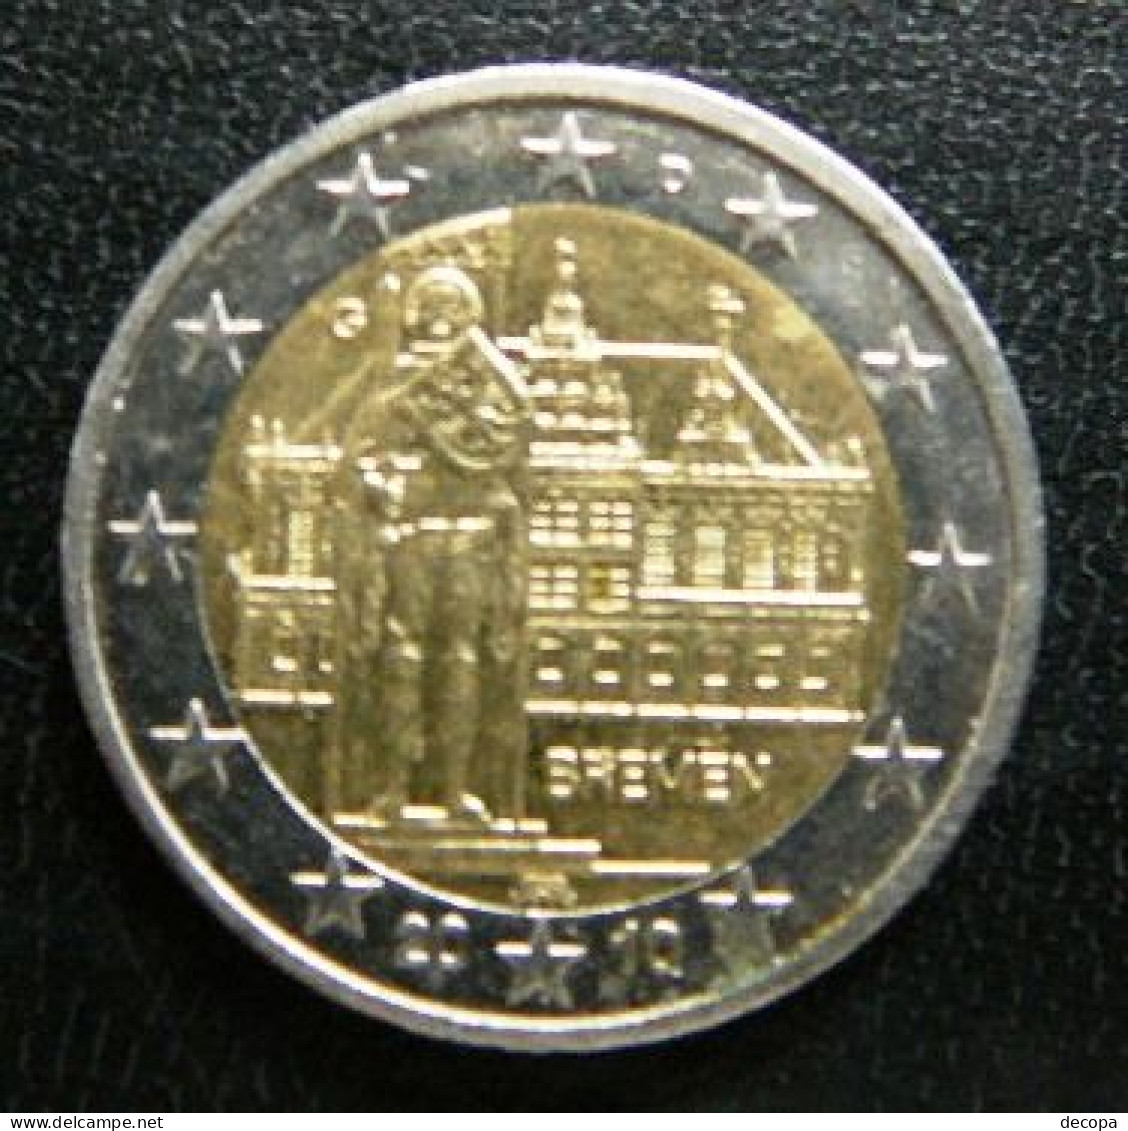 Germany - Allemagne - Duitsland   2 EURO 2010 G   Speciale Uitgave - Commemorative - Germany